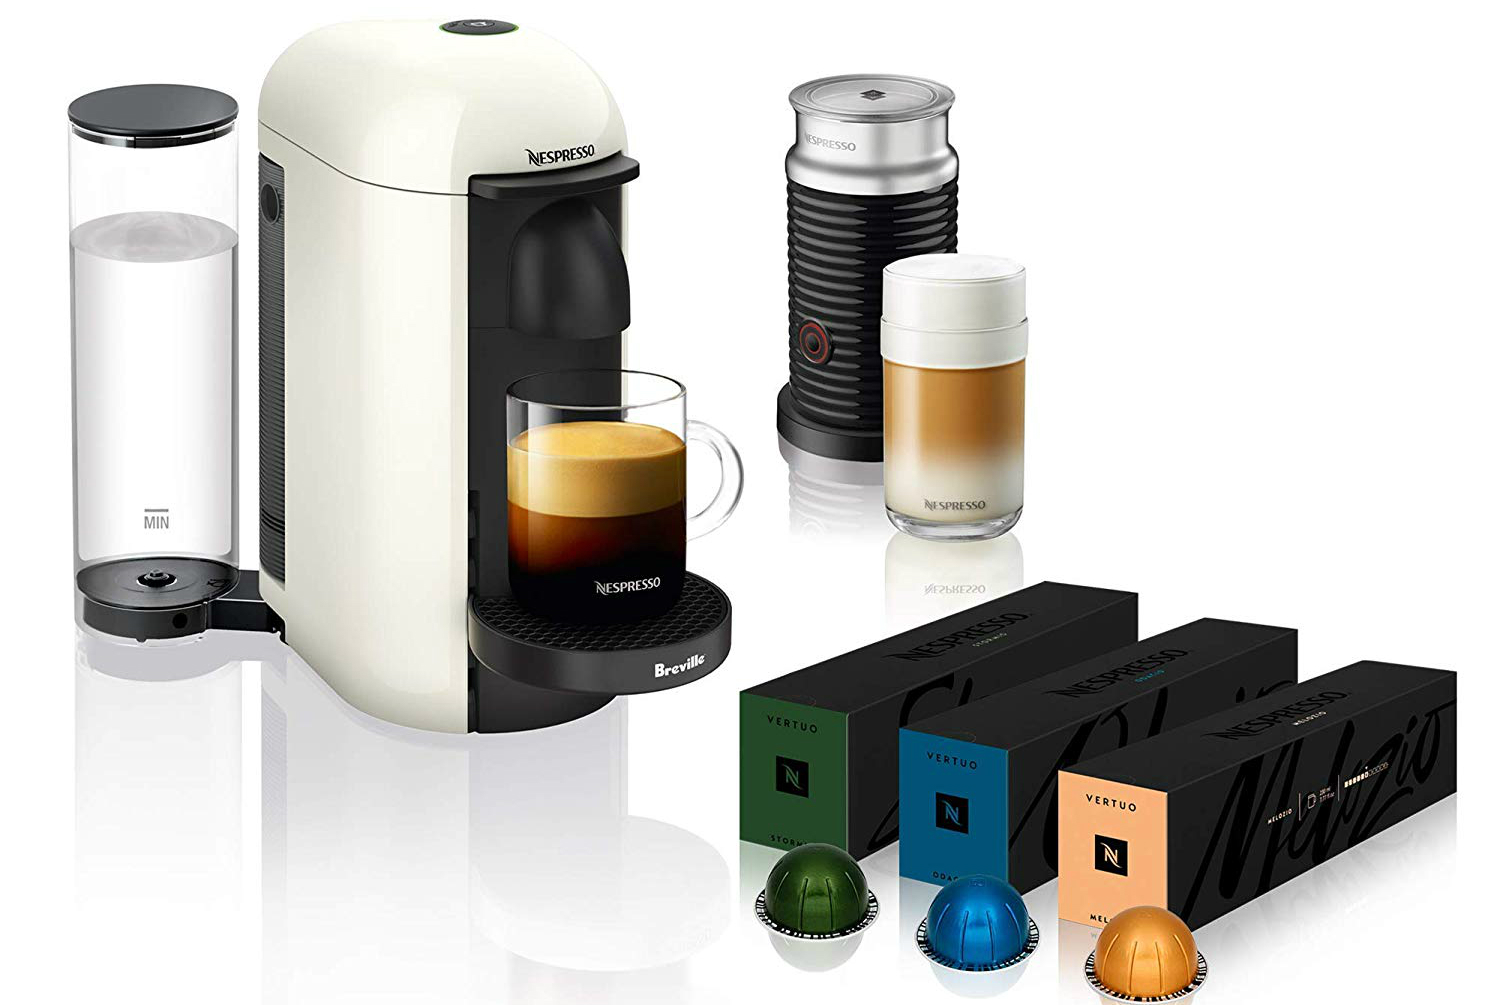 https://www.digitaltrends.com/wp-content/uploads/2019/04/nespresso-vertuoplus-coffee-and-espresso-machine-with-aeroccino-milk-frother-by-breville-white-nespresso-vertuoline-best-seller-coffee-capsule-assortment-10-count.jpg?fit=720%2C482&p=1